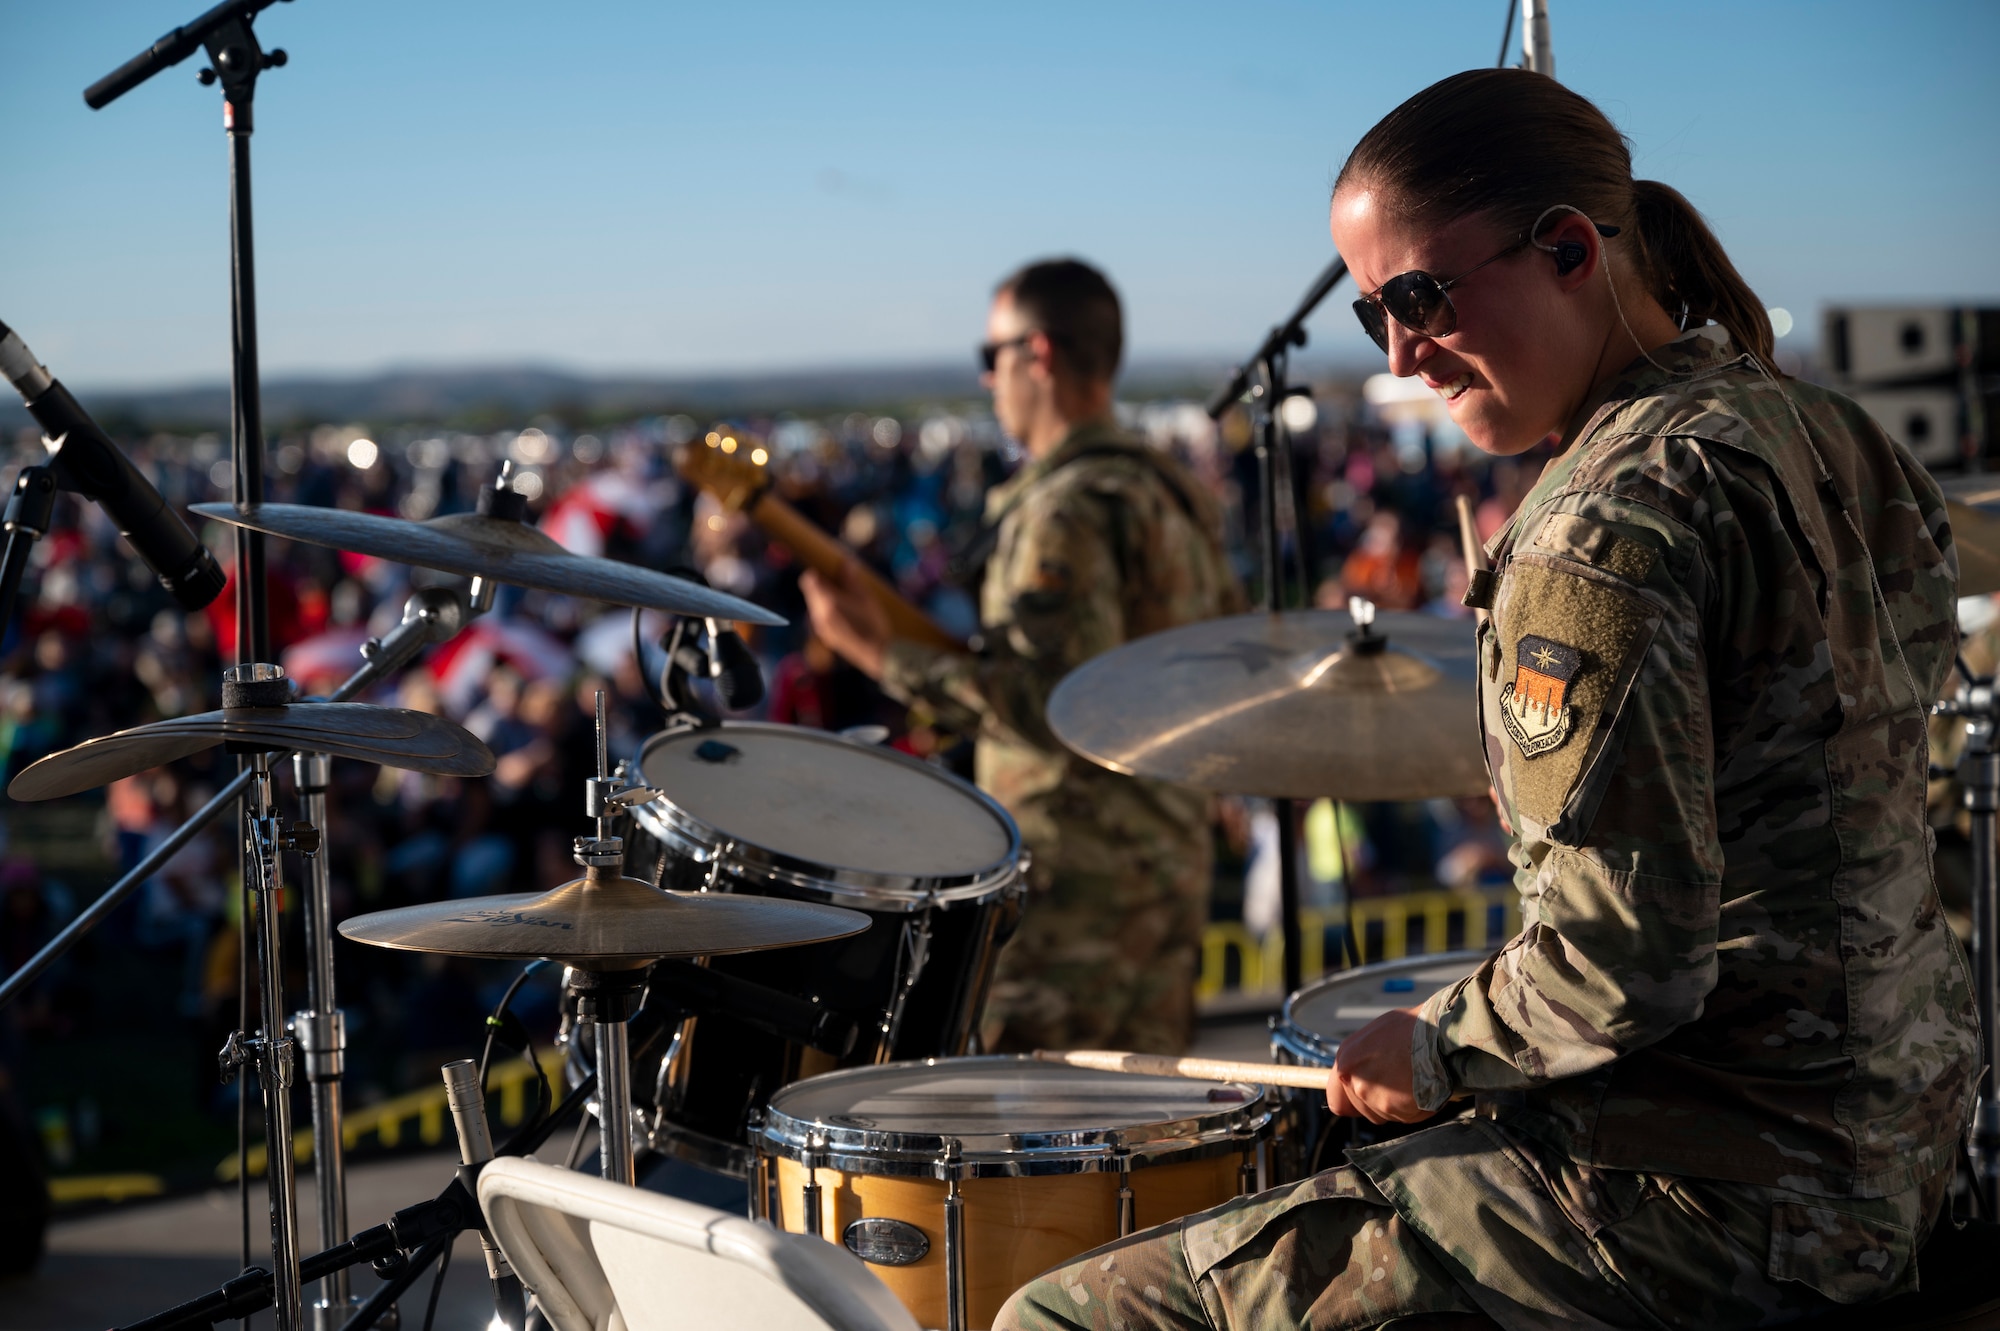 Tech. Sgt. Kathryn Yuill, Air Force Academy Band regional bandsman, plays the drums during the International Balloon Fiesta in Albuquerque, N.M., Oct. 7, 2023. The Albuquerque International Balloon Fiesta is held annually and draws in hundreds of thousands attendees each year. (U.S. Air Force photo by Airman 1st Class Ruben Garibay.)